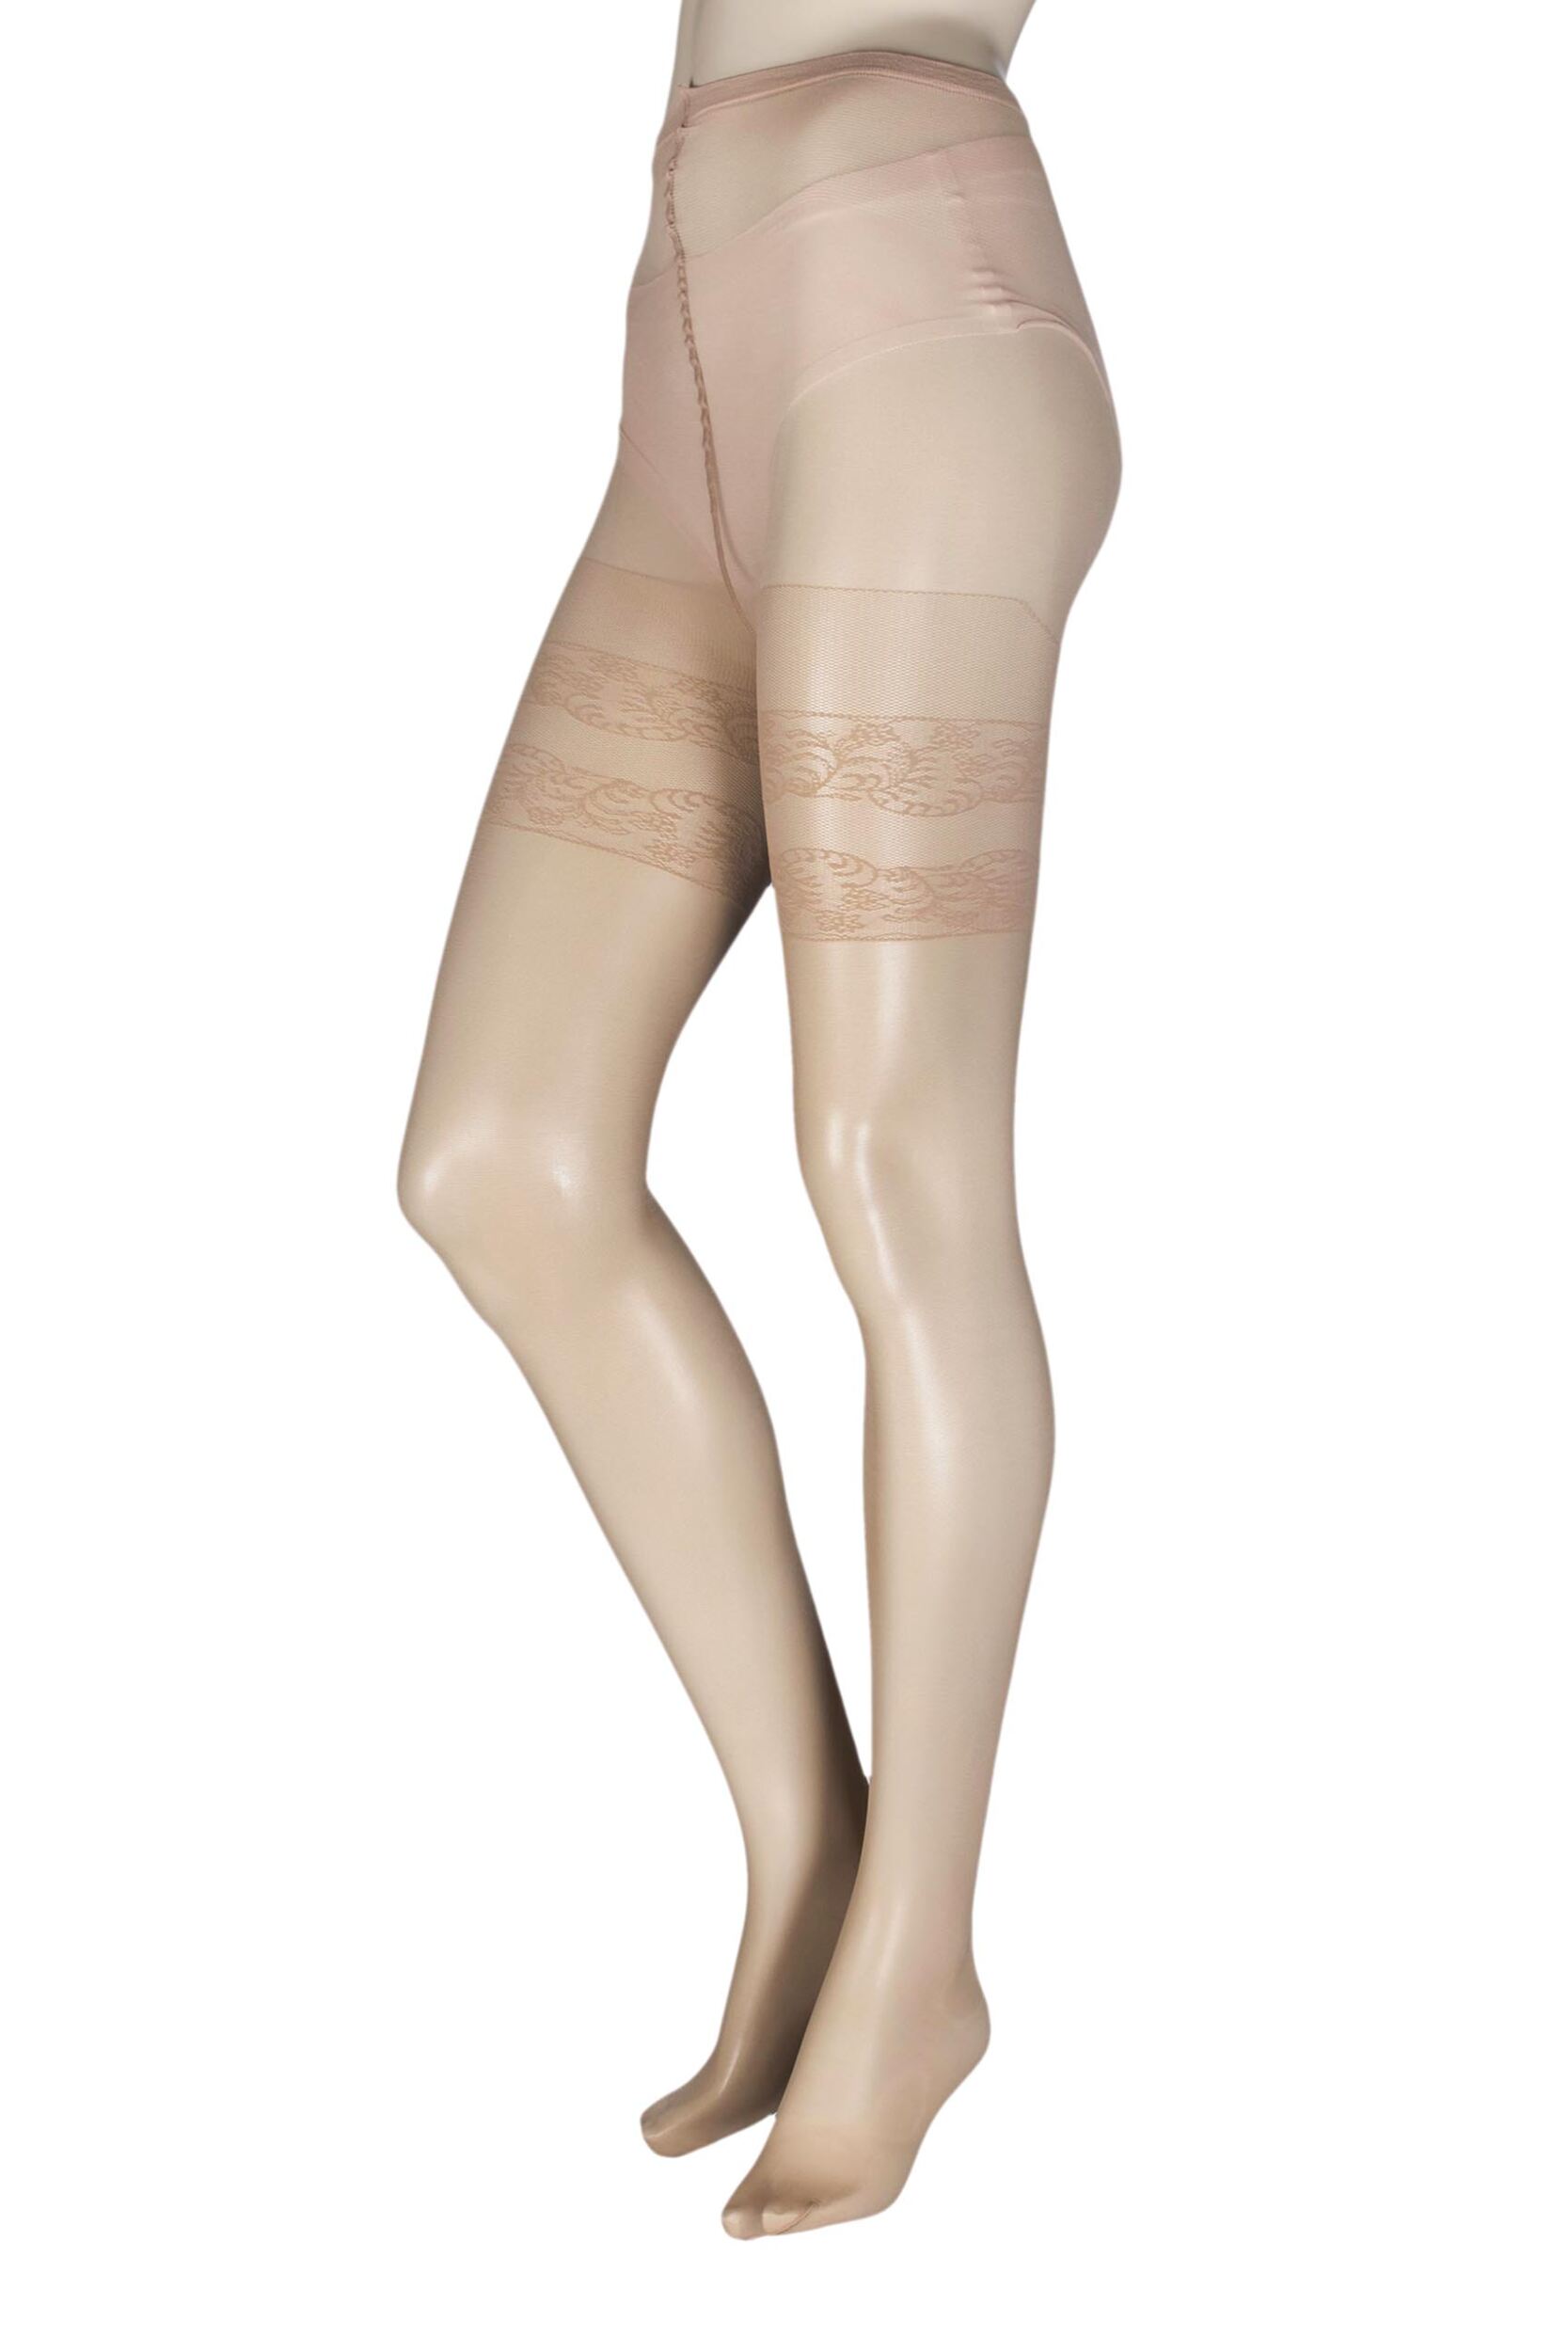 1 Pair Cosmetic Curvy Margherita Sheer Mock Hold Up Tights Ladies Large (20-22) - Trasparenze